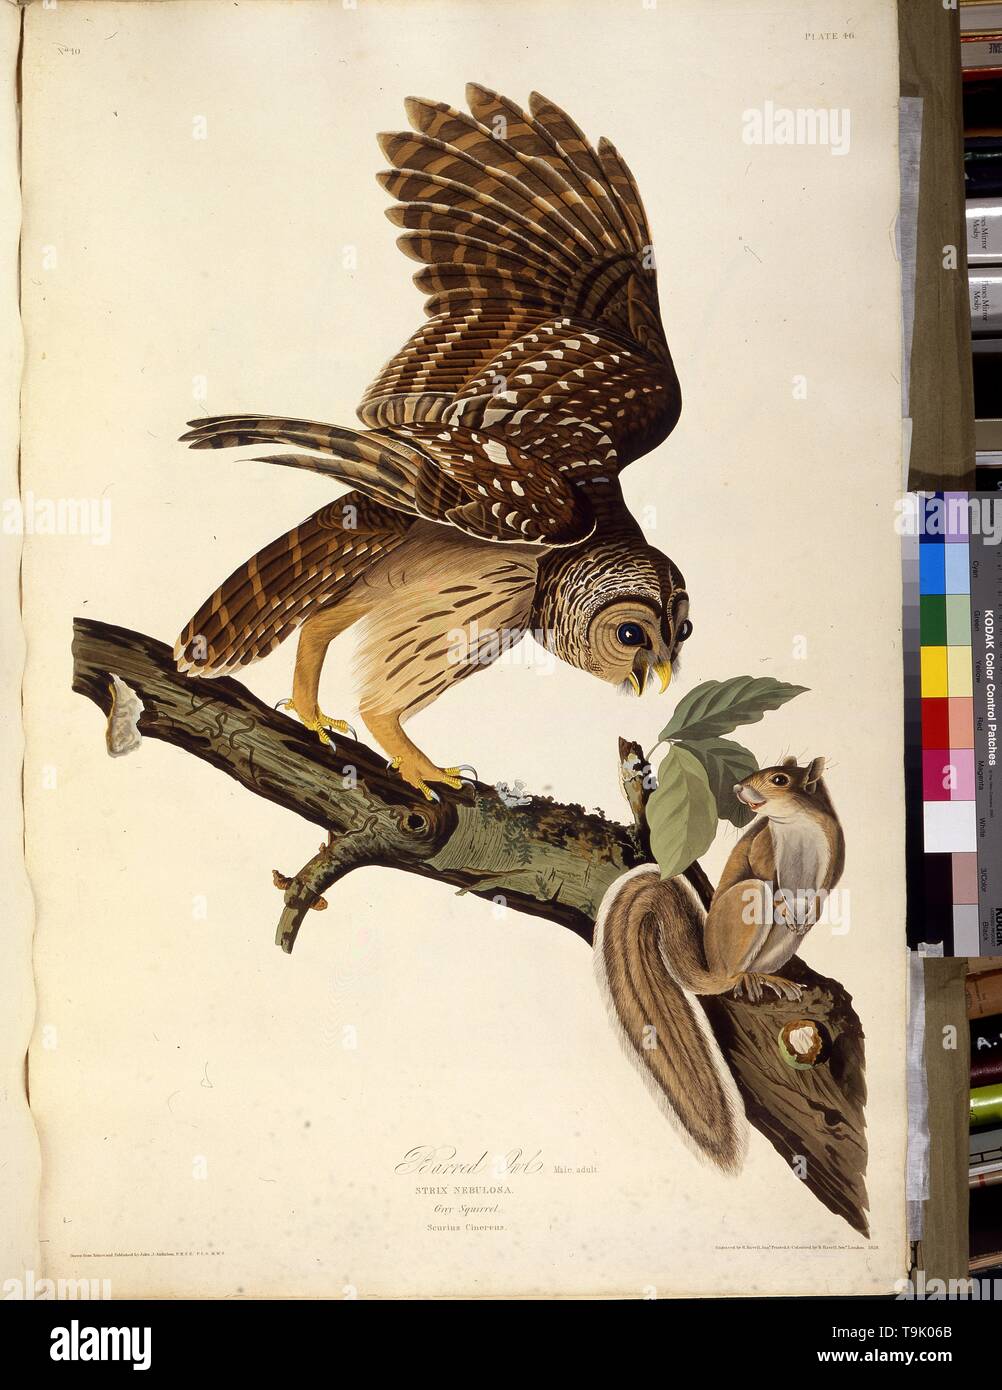 The barred owl. From 'The Birds of America'. Museum: PRIVATE COLLECTION. Author: JOHN JAMES AUDUBON. Stock Photo